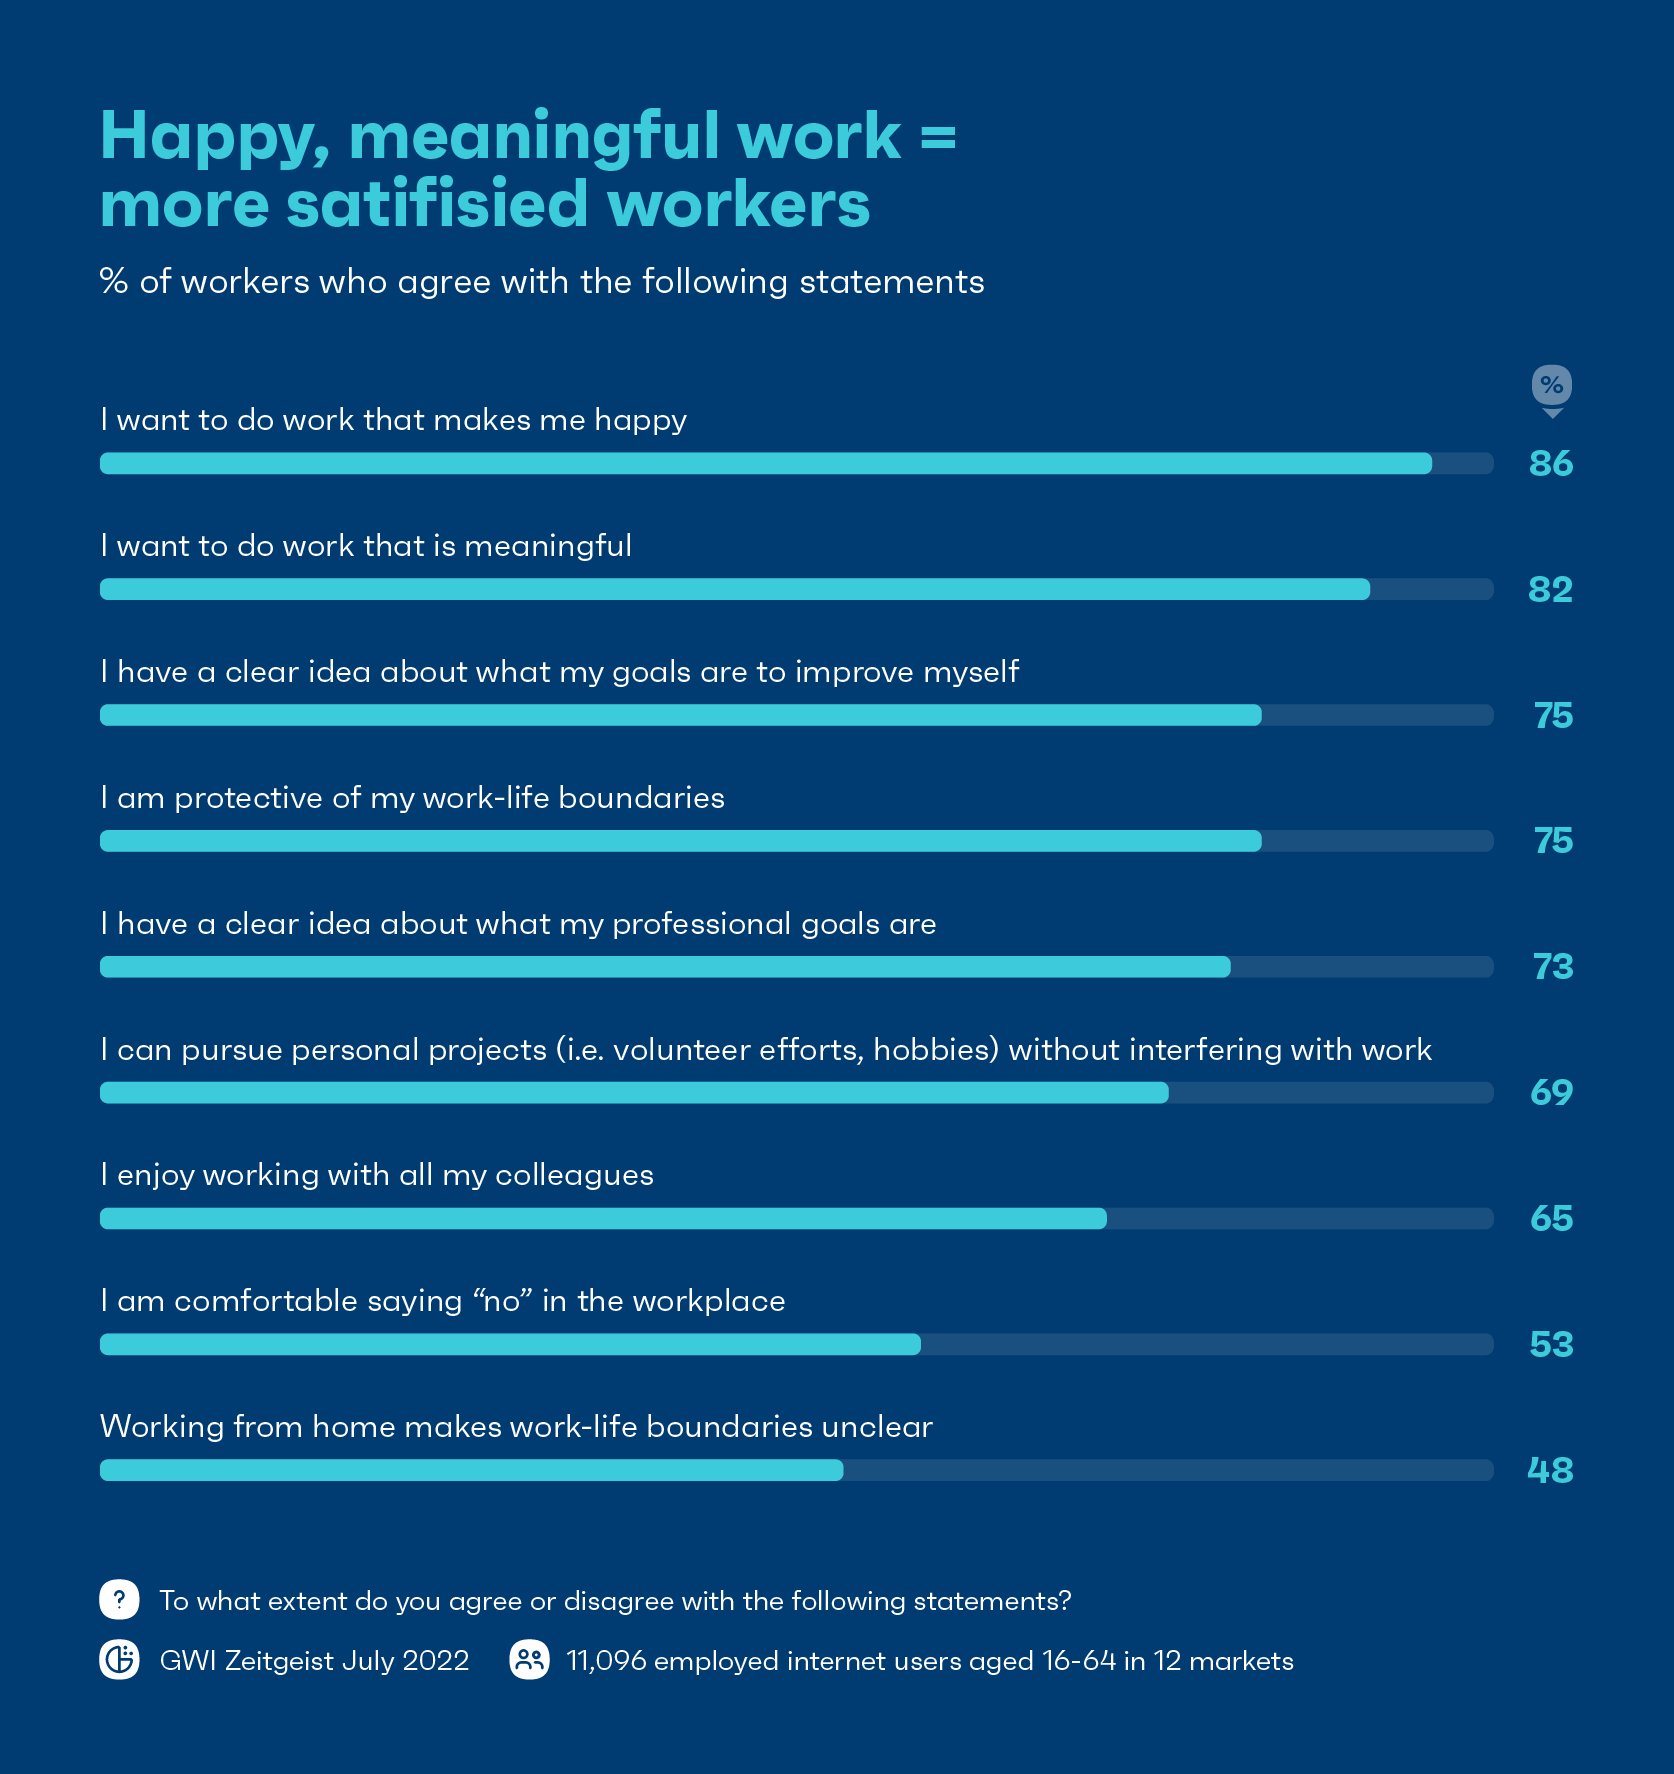 Happy, meaningful work means more satisfied workers.